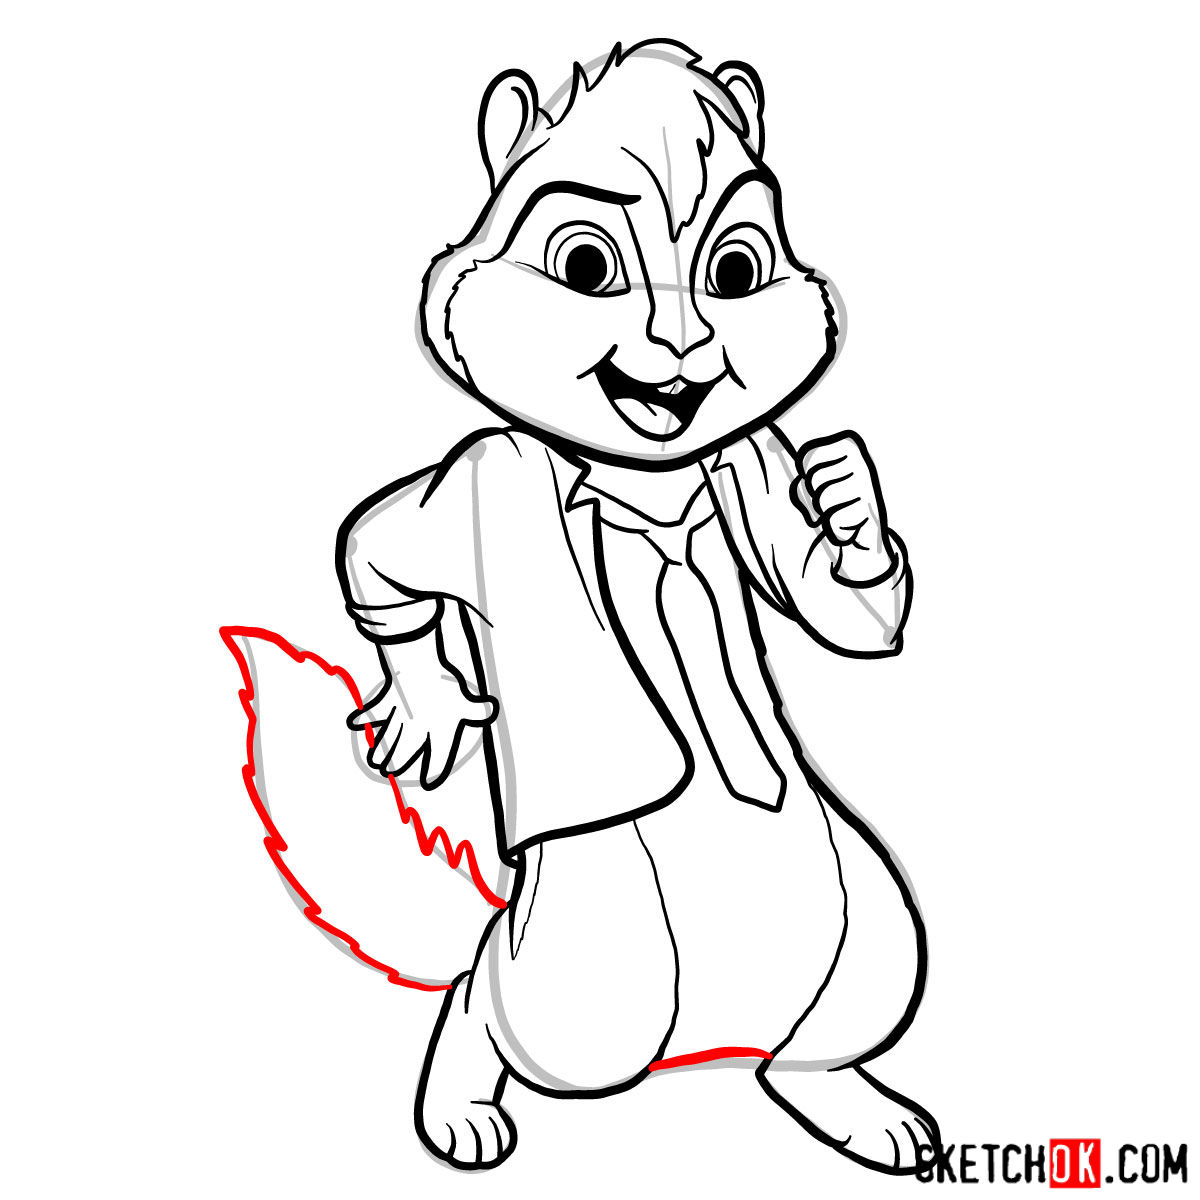 How to draw Alvin from Alvin and the Chipmunks - step 14